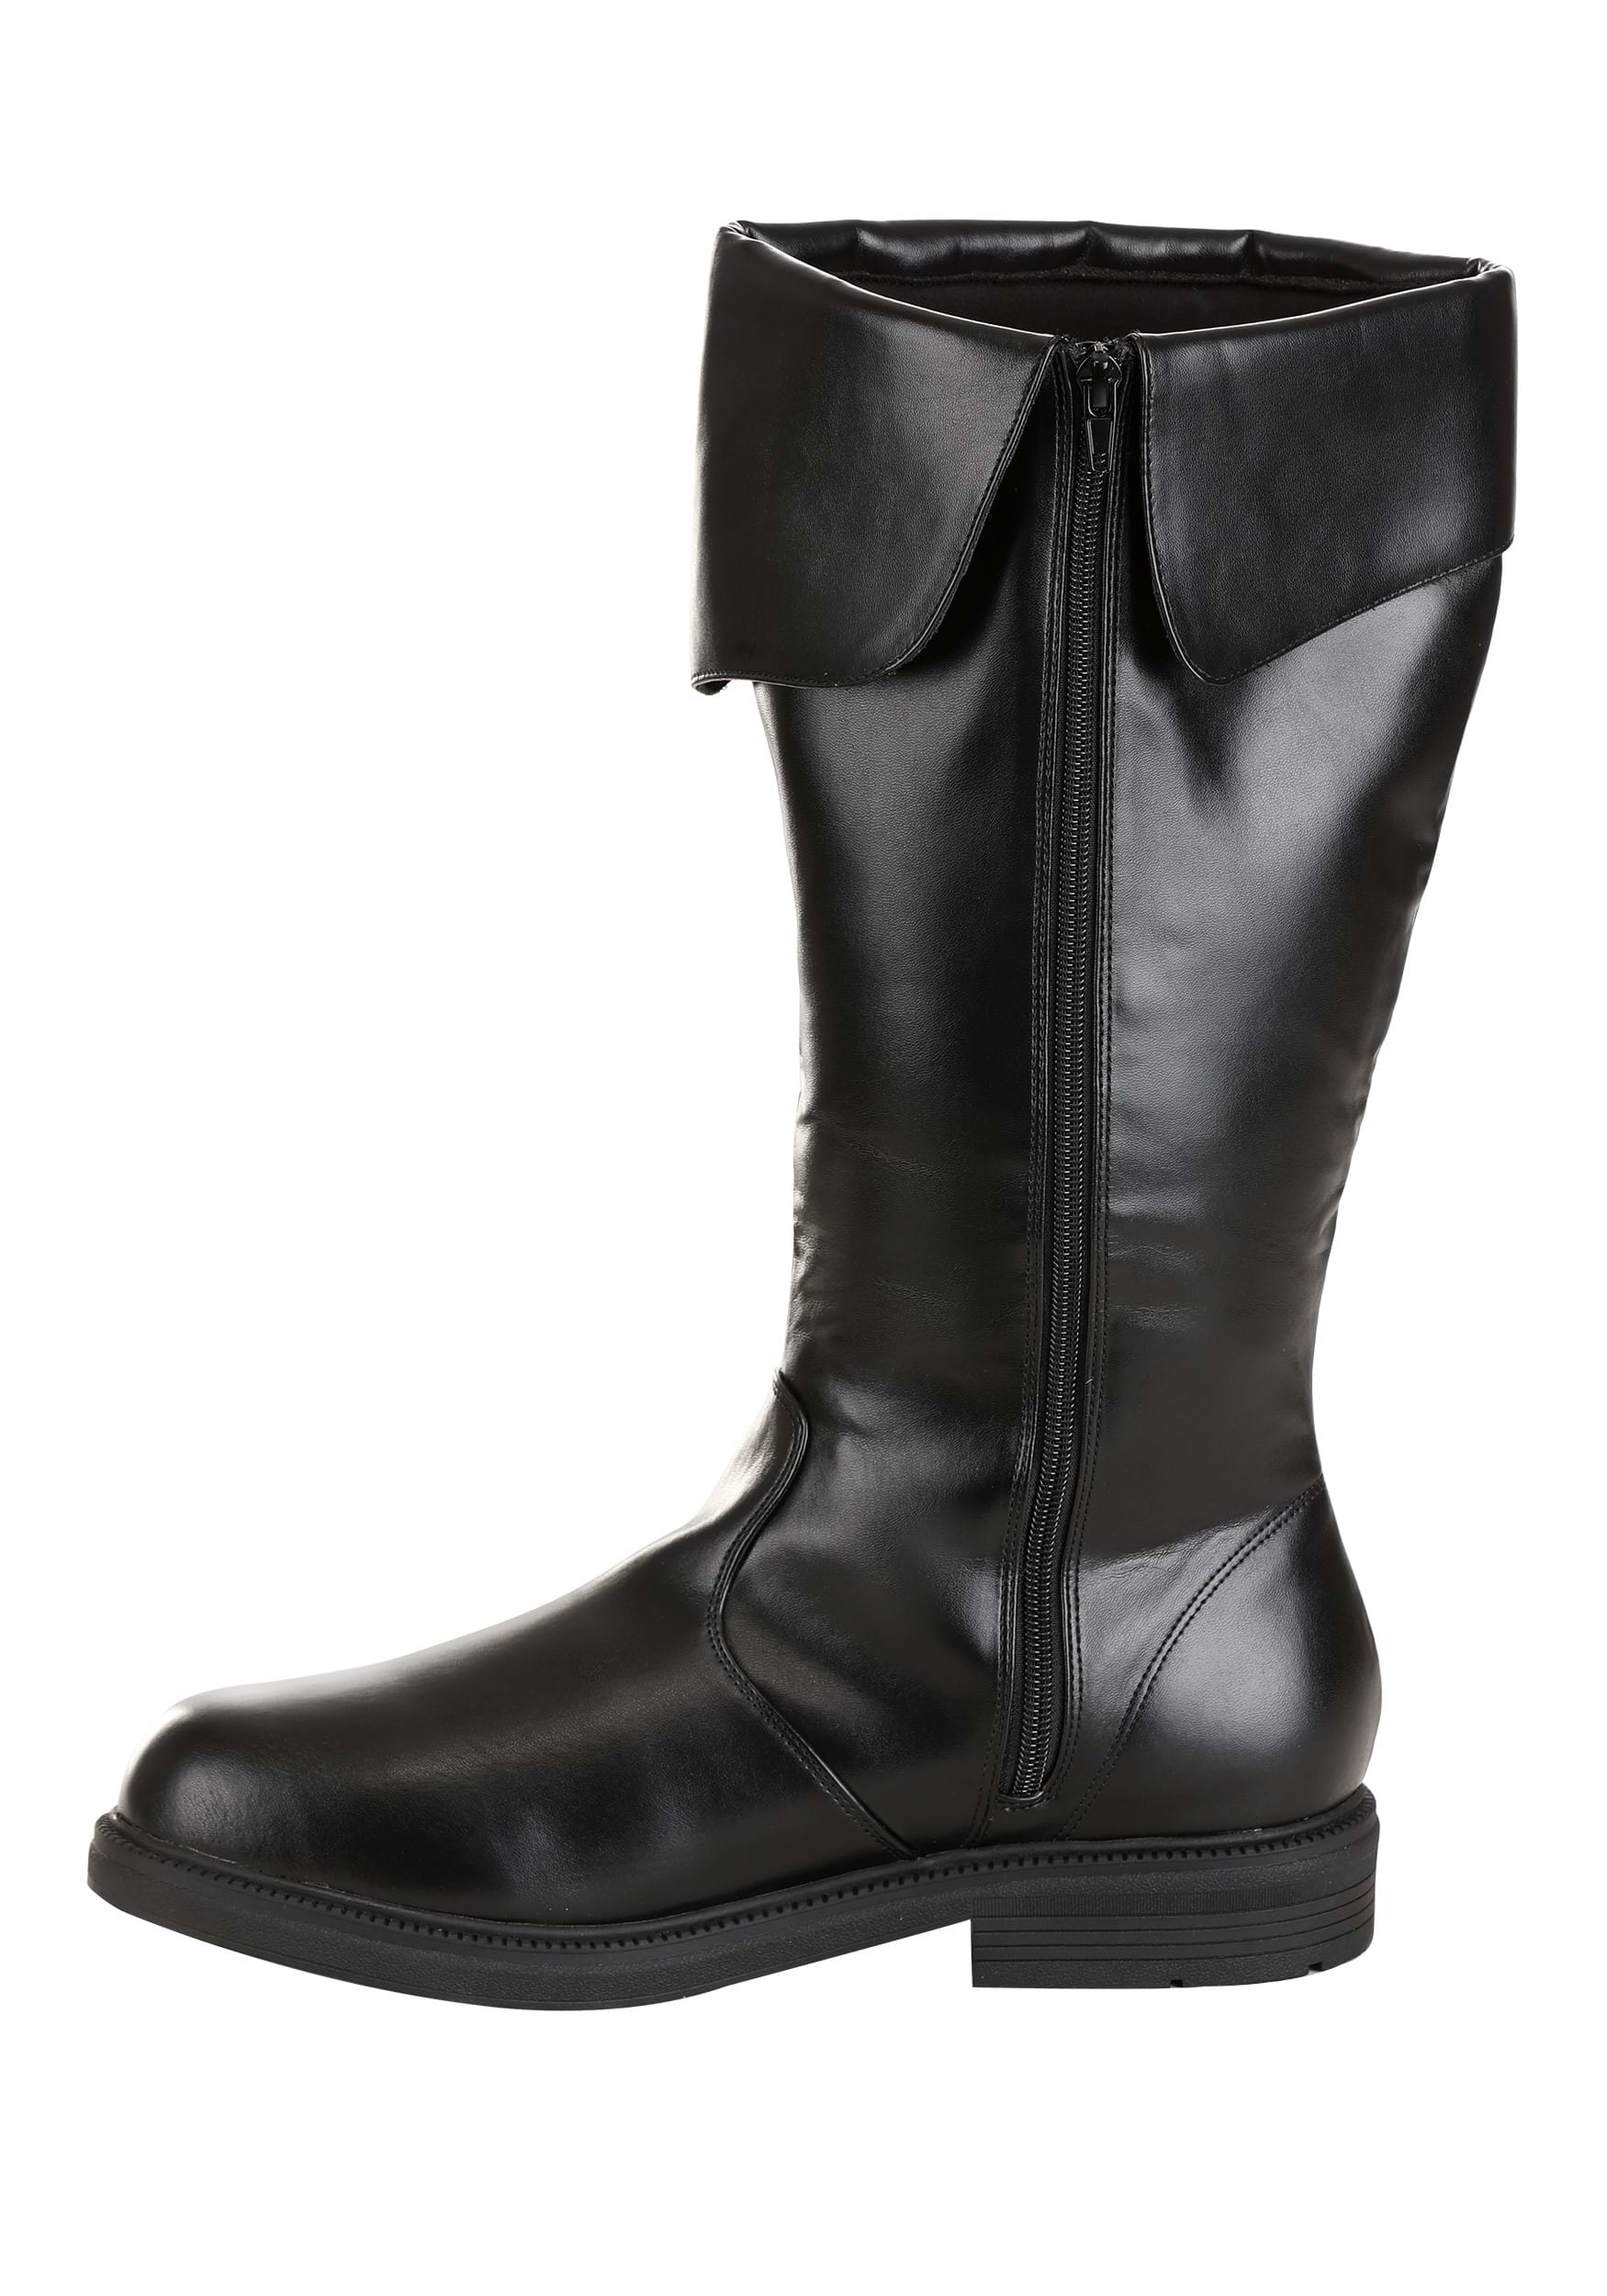 Tall Black Costume Boots For Men